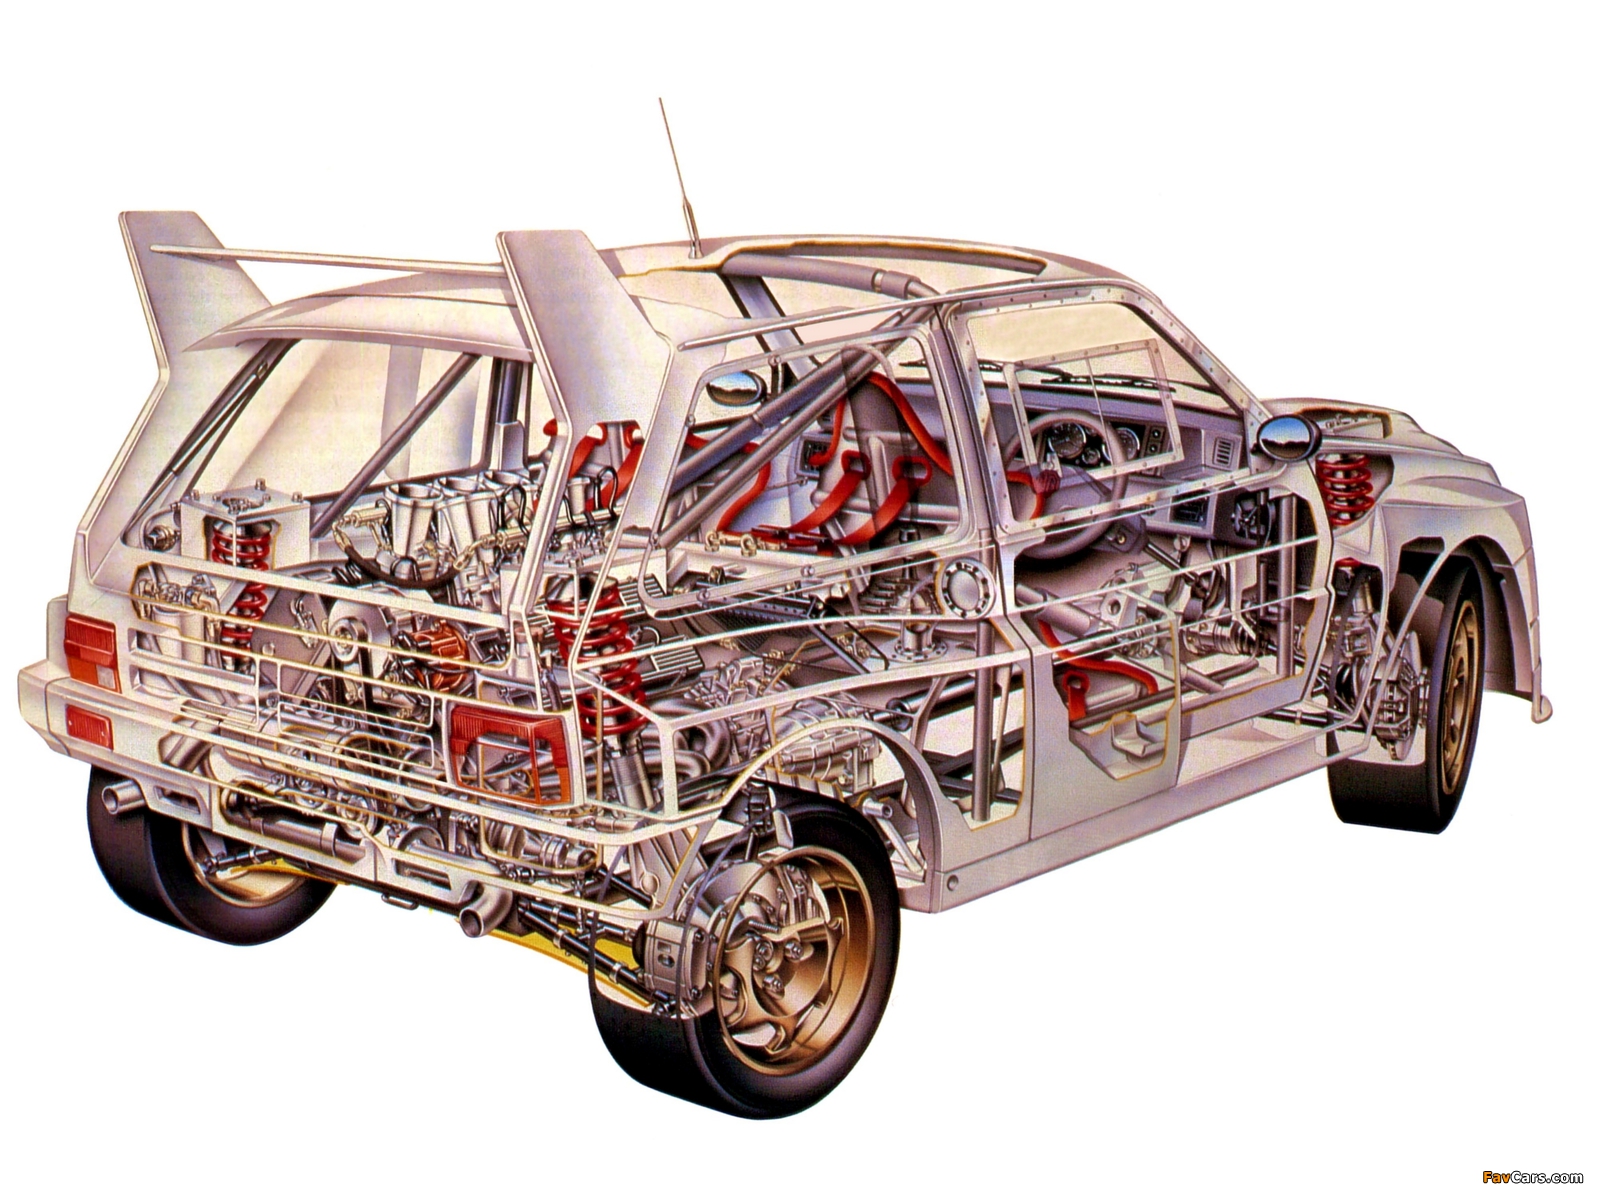 MG Metro 6R4 Group B Rally Car 1985–86 pictures (1600 x 1200)